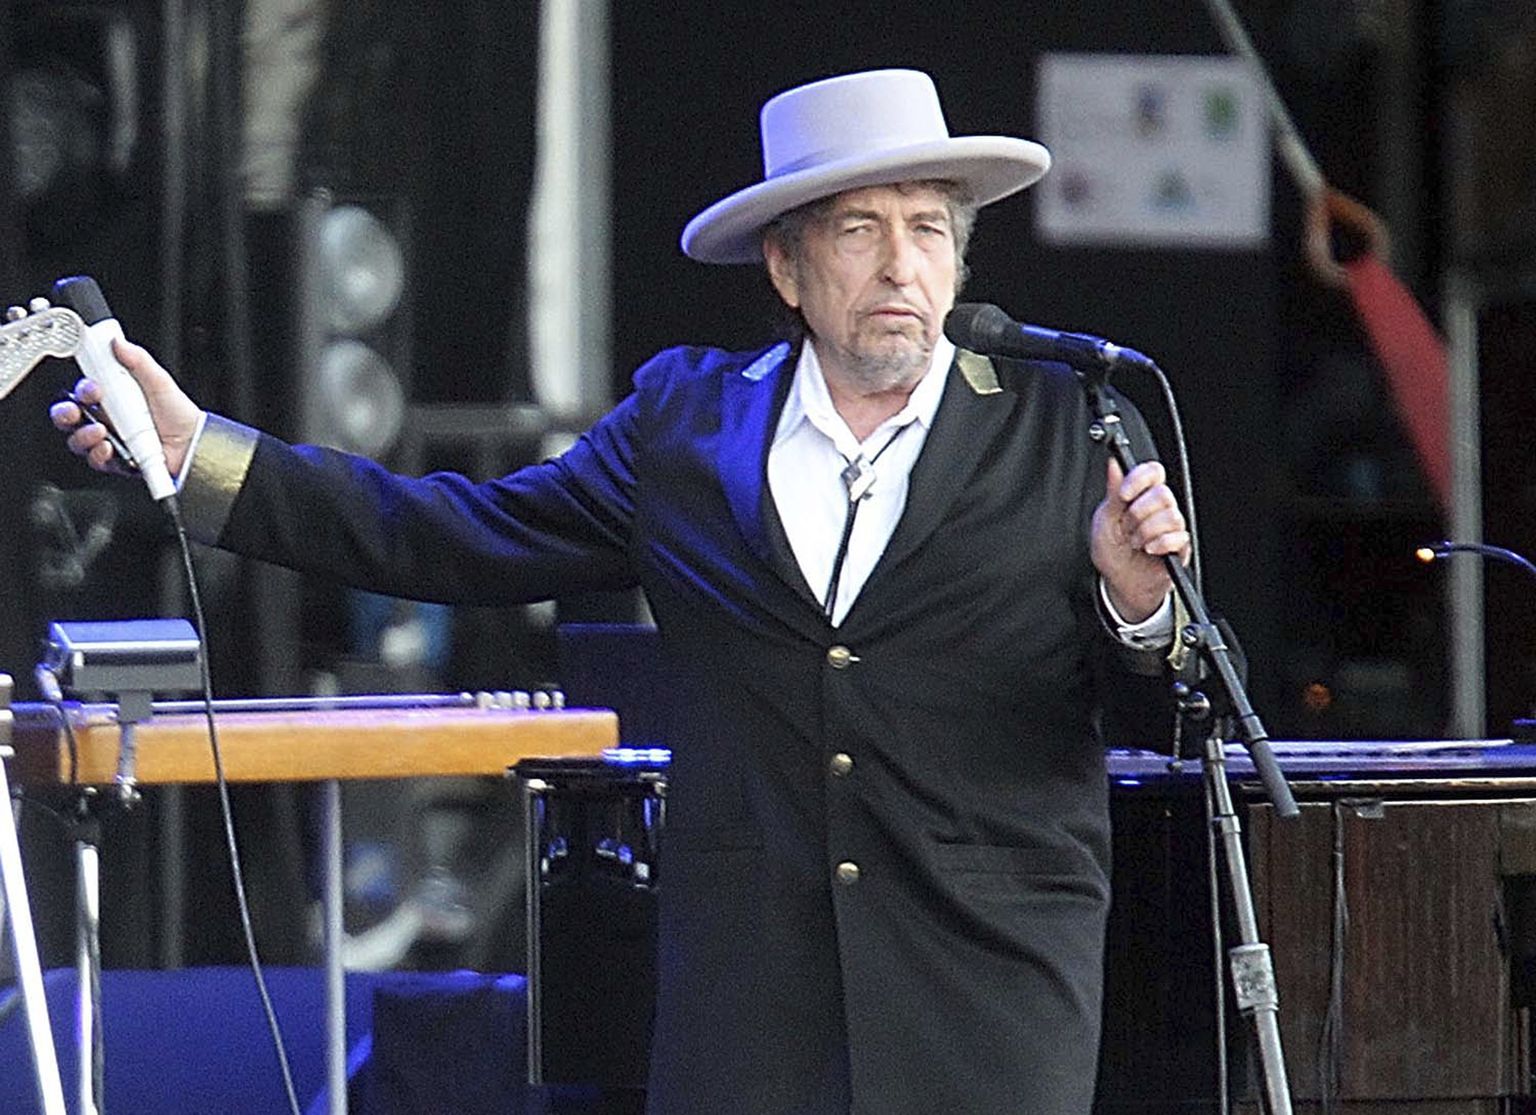 FILE - This July 22, 2012, file photo shows U.S. singer-songwriter Bob Dylan performing onstage at "Les Vieilles Charrues" Festival in Carhaix, western France. Dylan won the 2016 Nobel Prize in literature, announced Thursday, Oct. 13, 2016. (AP Photo/David Vincent, File)